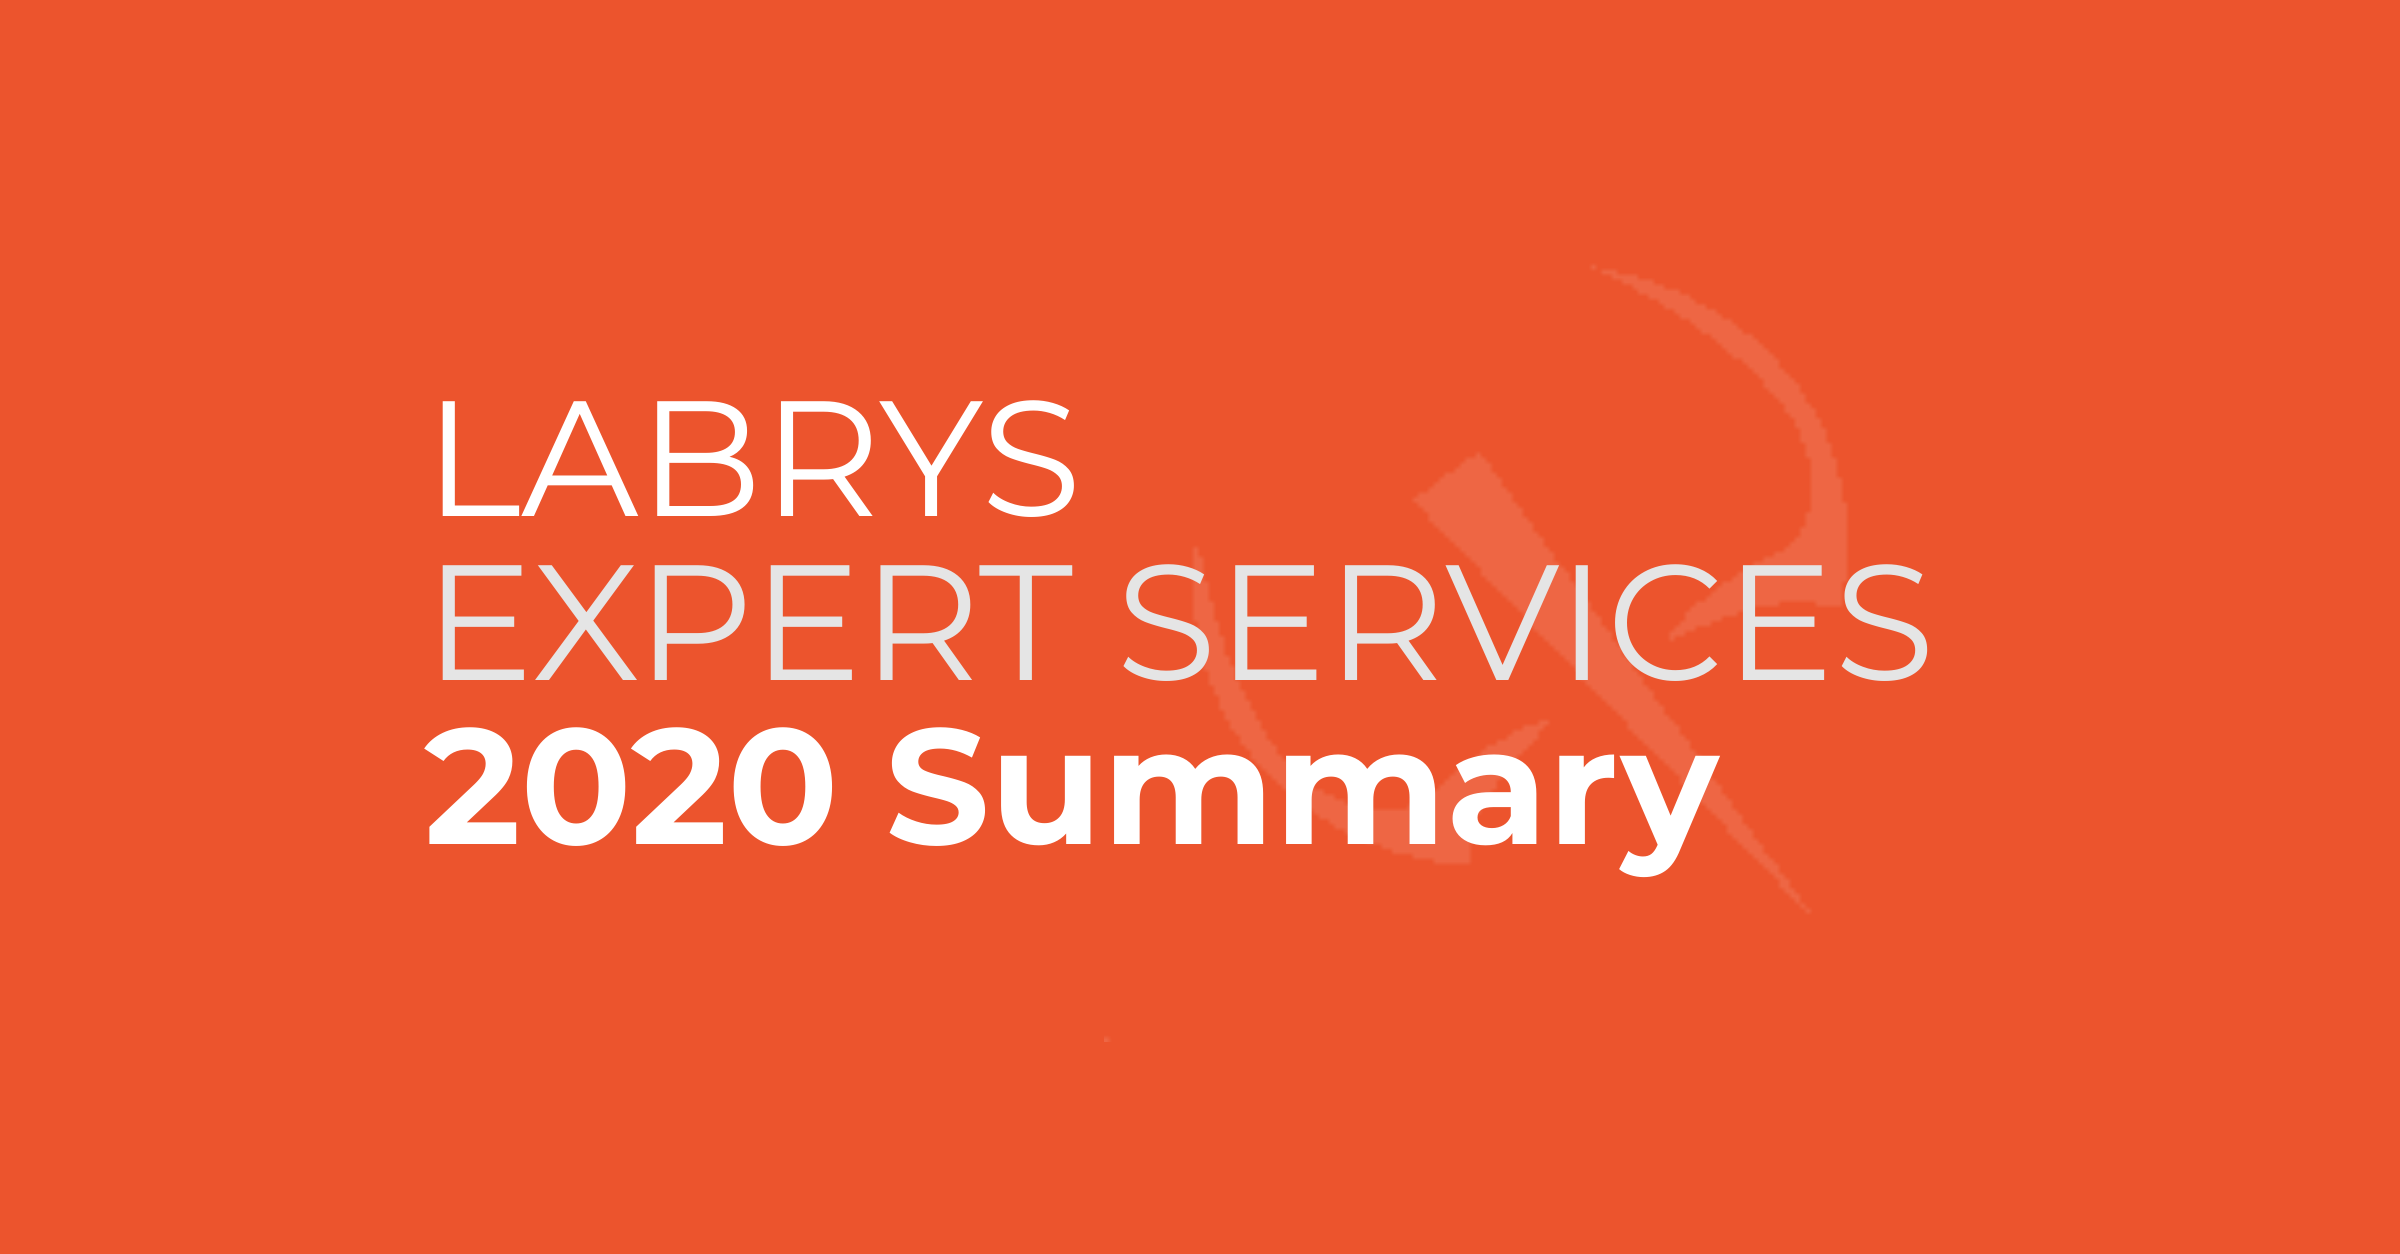 Labrys Expert Services 2020 Summary Infographic